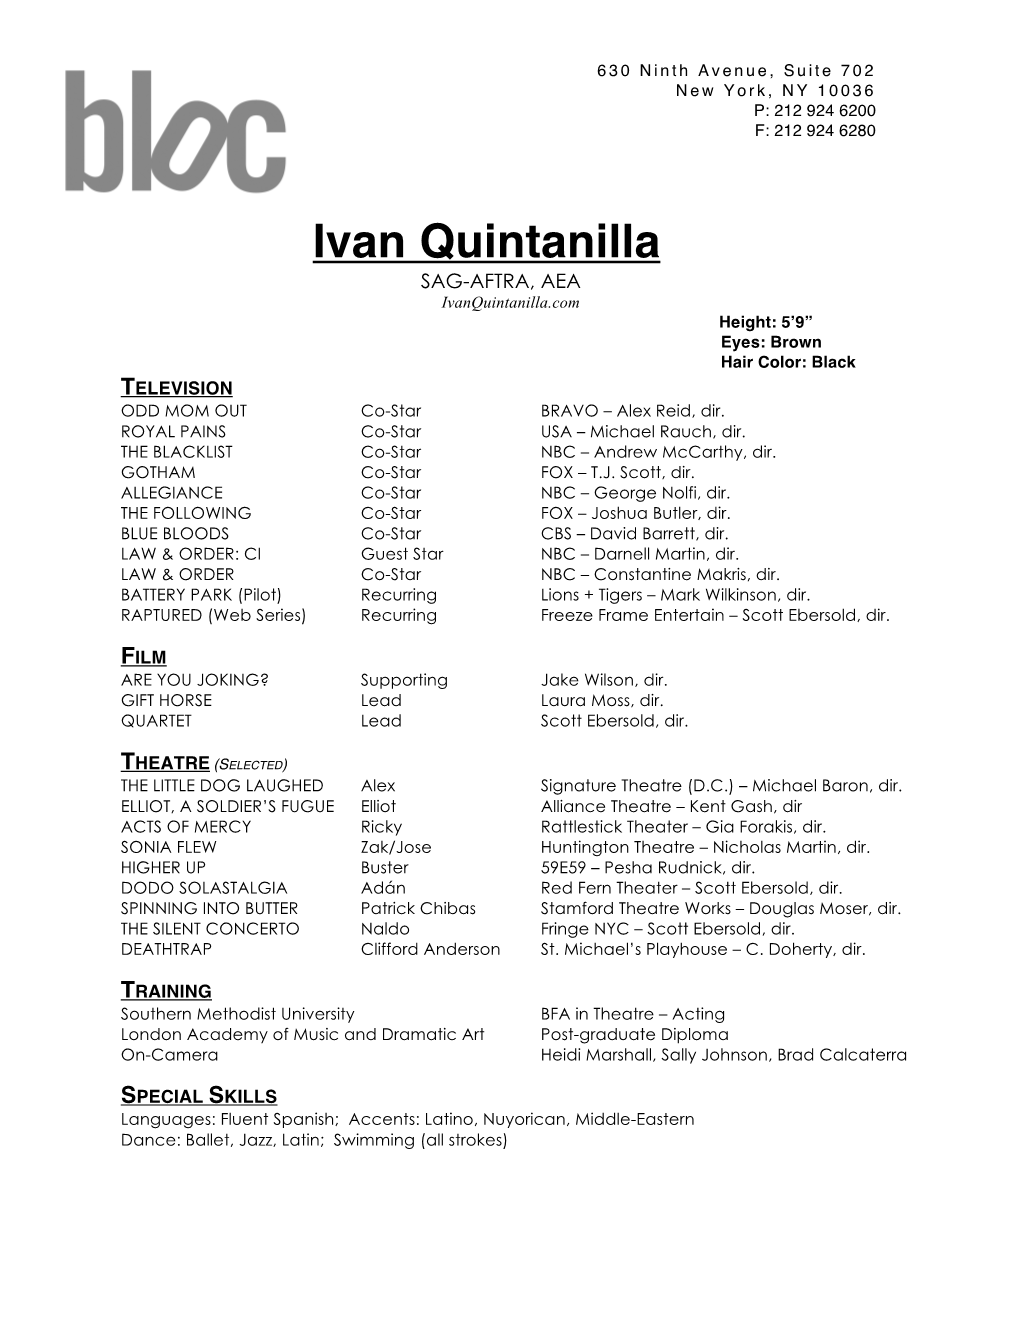 Download a PDF of Ivan's Resume Here